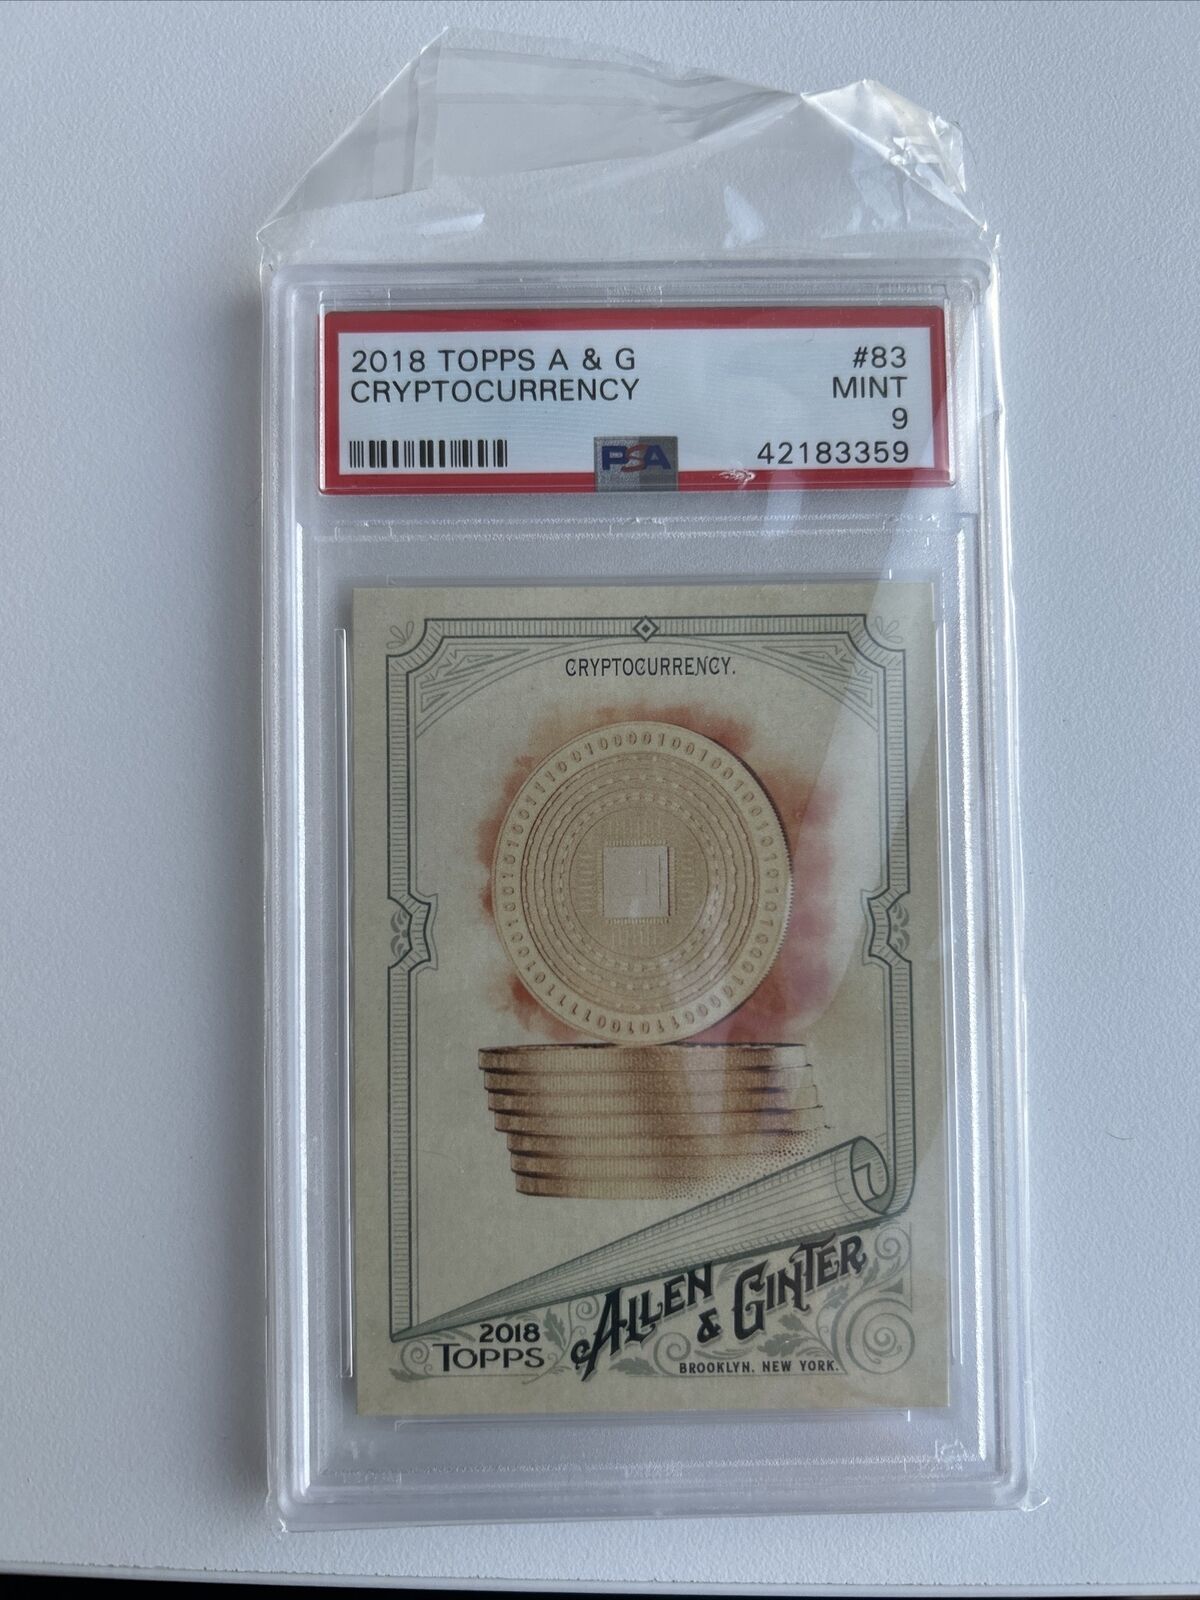 2018 TOPPS ALLEN GINTER #83 CRYPTOCURRENCY CRYPTO BTC BITCOIN CARD PSA GRADED 9